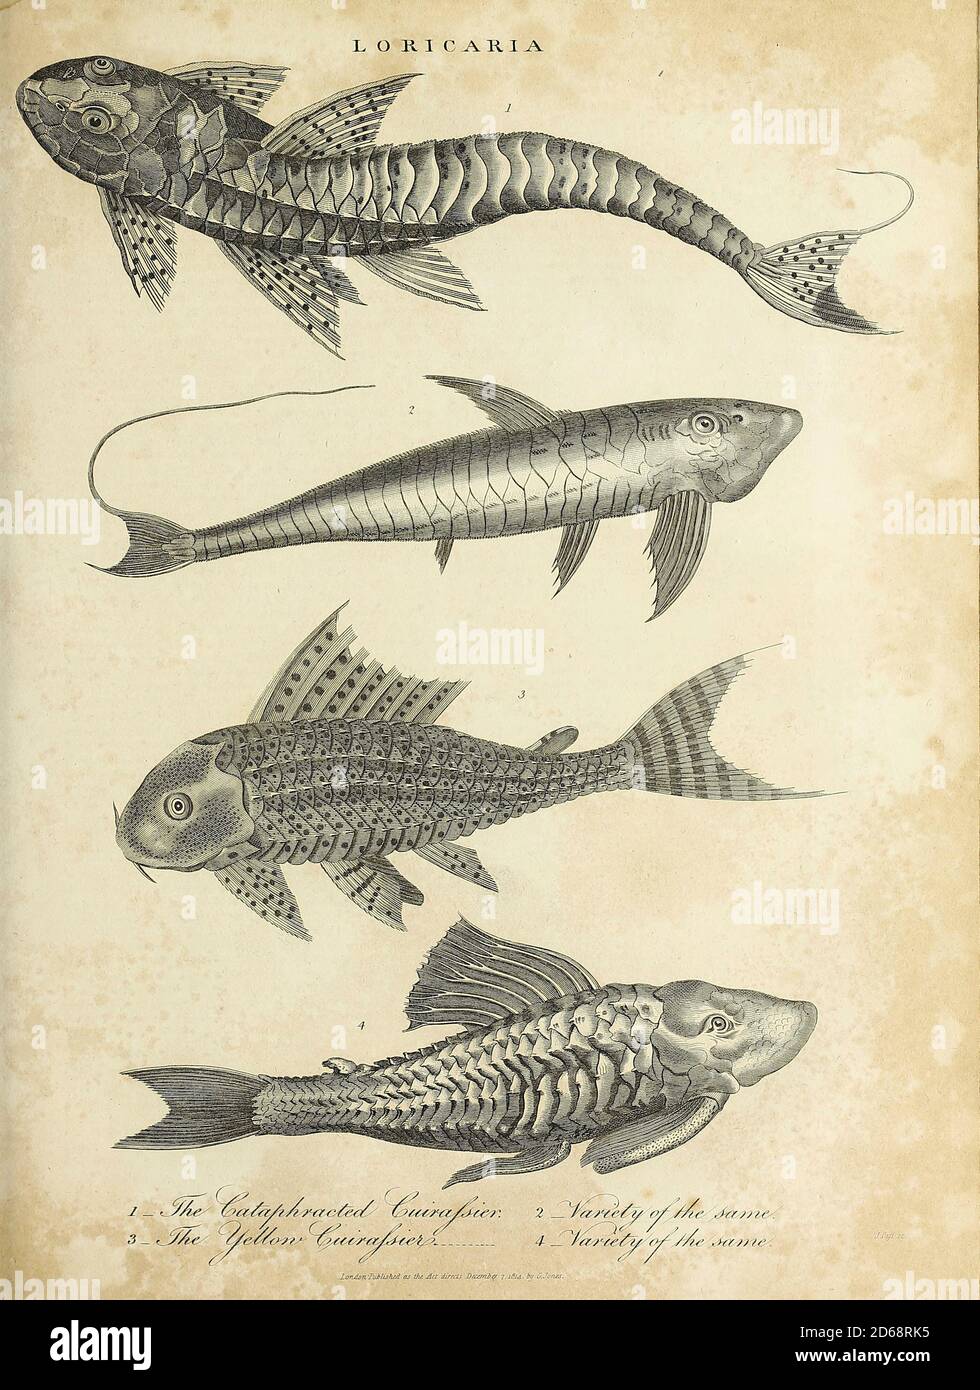 Loricaria is a genus of armored catfish native to South America. Copperplate engraving From the Encyclopaedia Londinensis or, Universal dictionary of arts, sciences, and literature; Volume XIII;  Edited by Wilkes, John. Published in London in 1815 Stock Photo